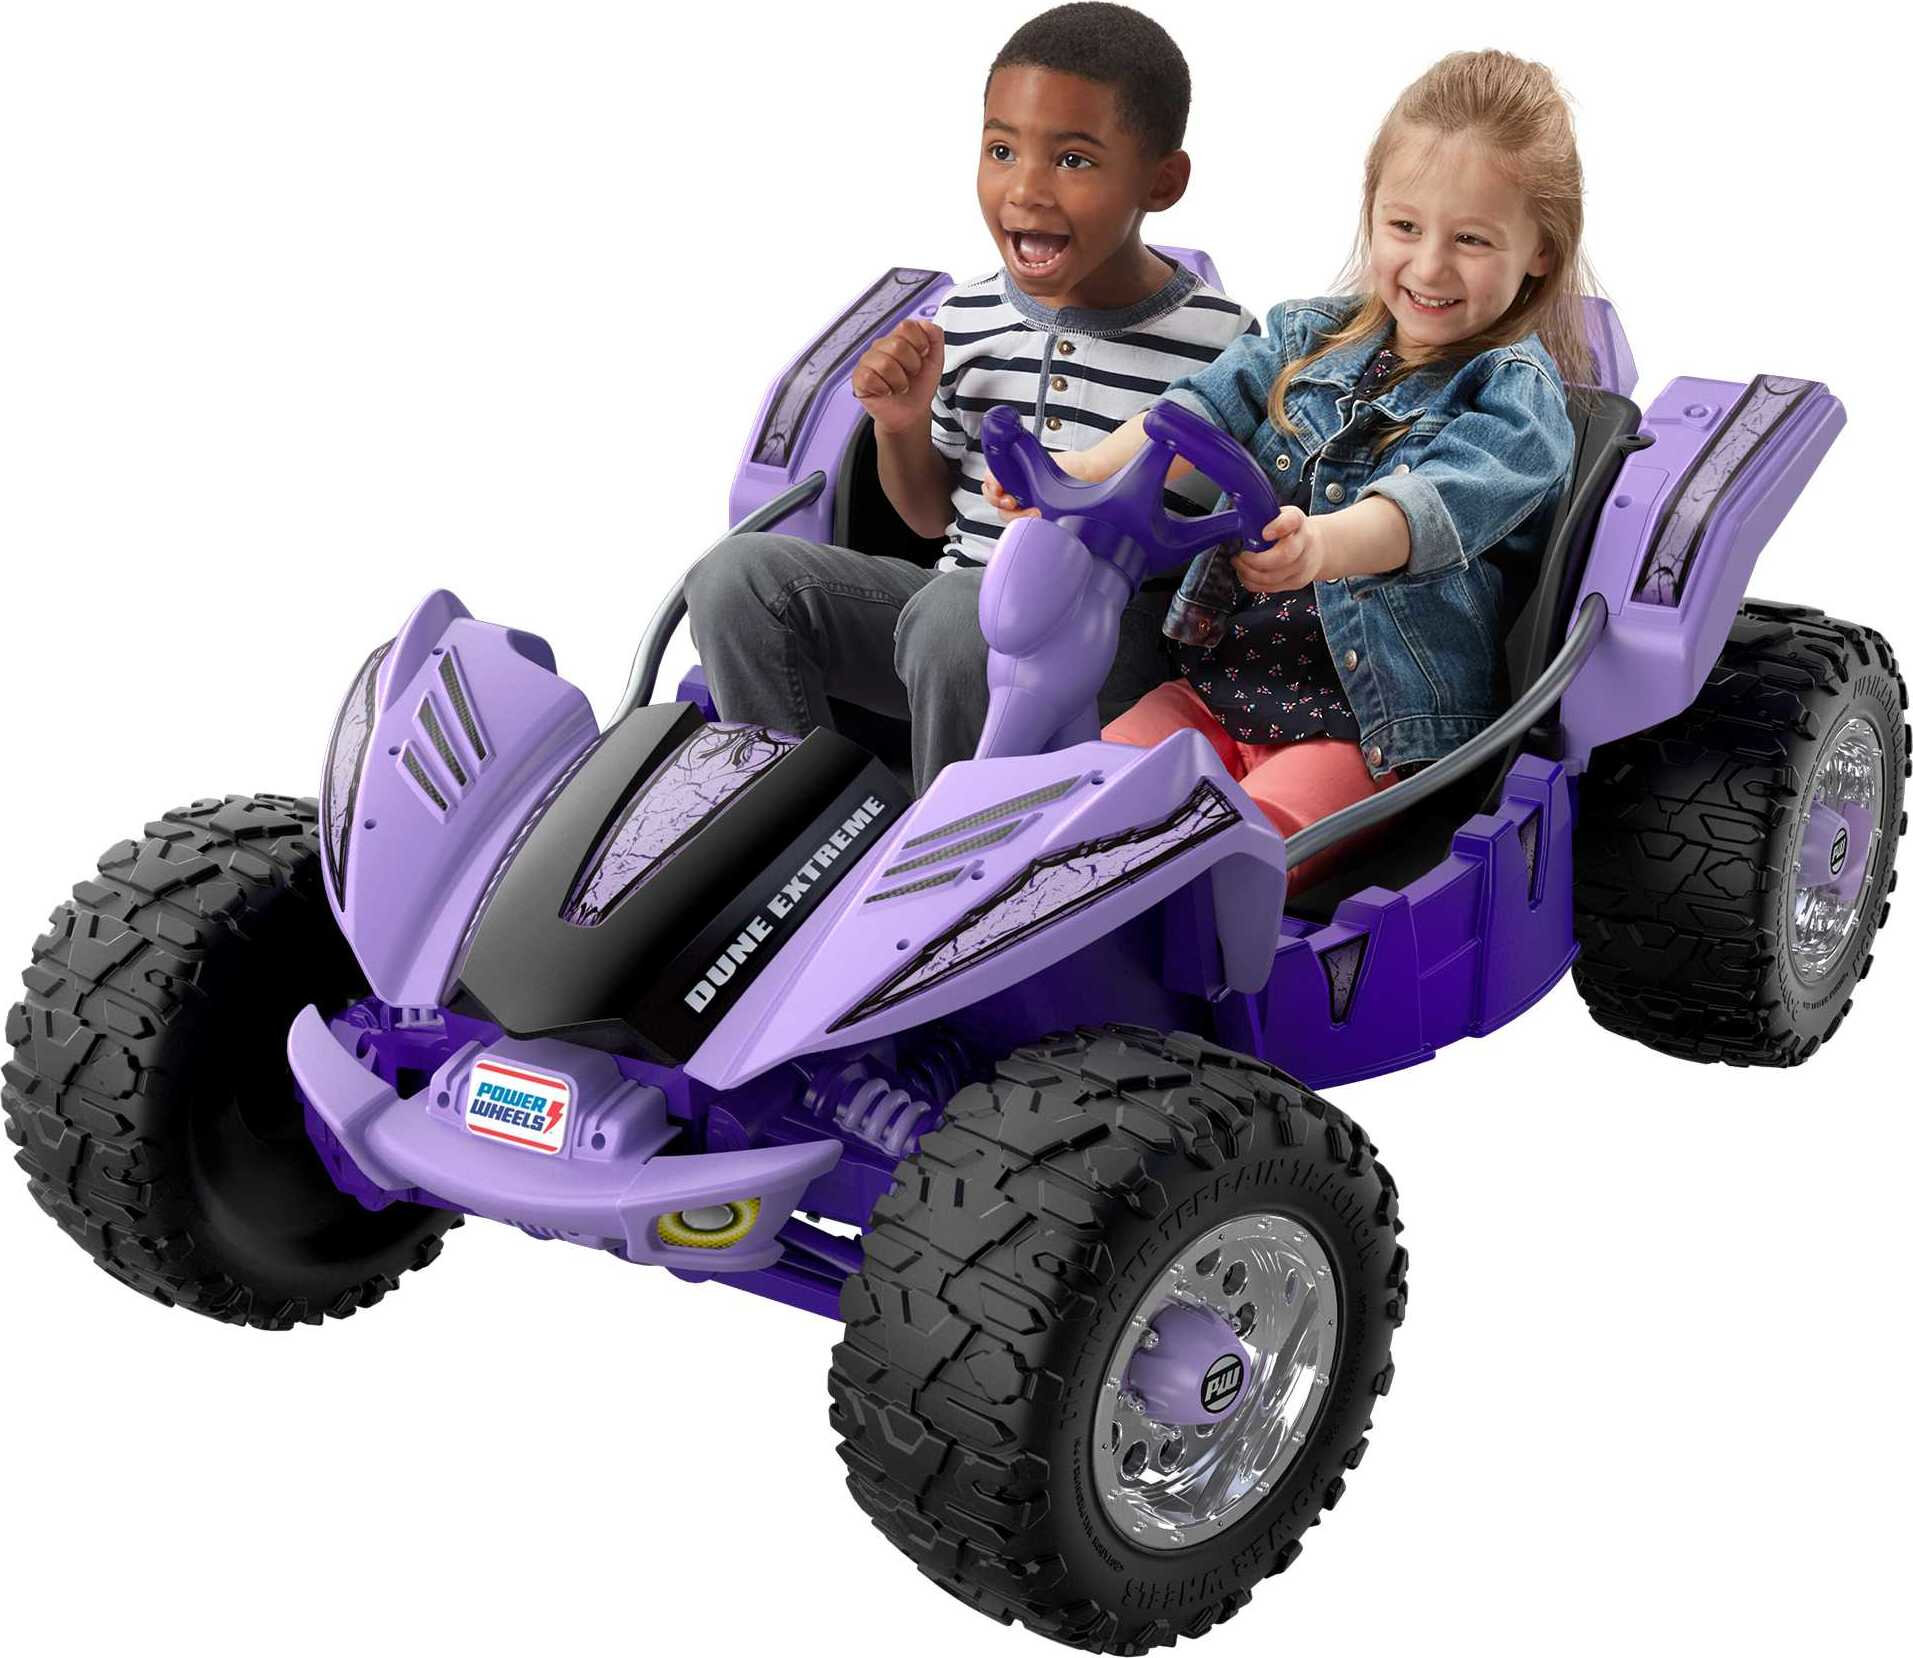 12V Power Wheels Dune Racer Extreme Battery-Powered Ride-on, Purple, for a Child Ages 3-7 - image 1 of 6